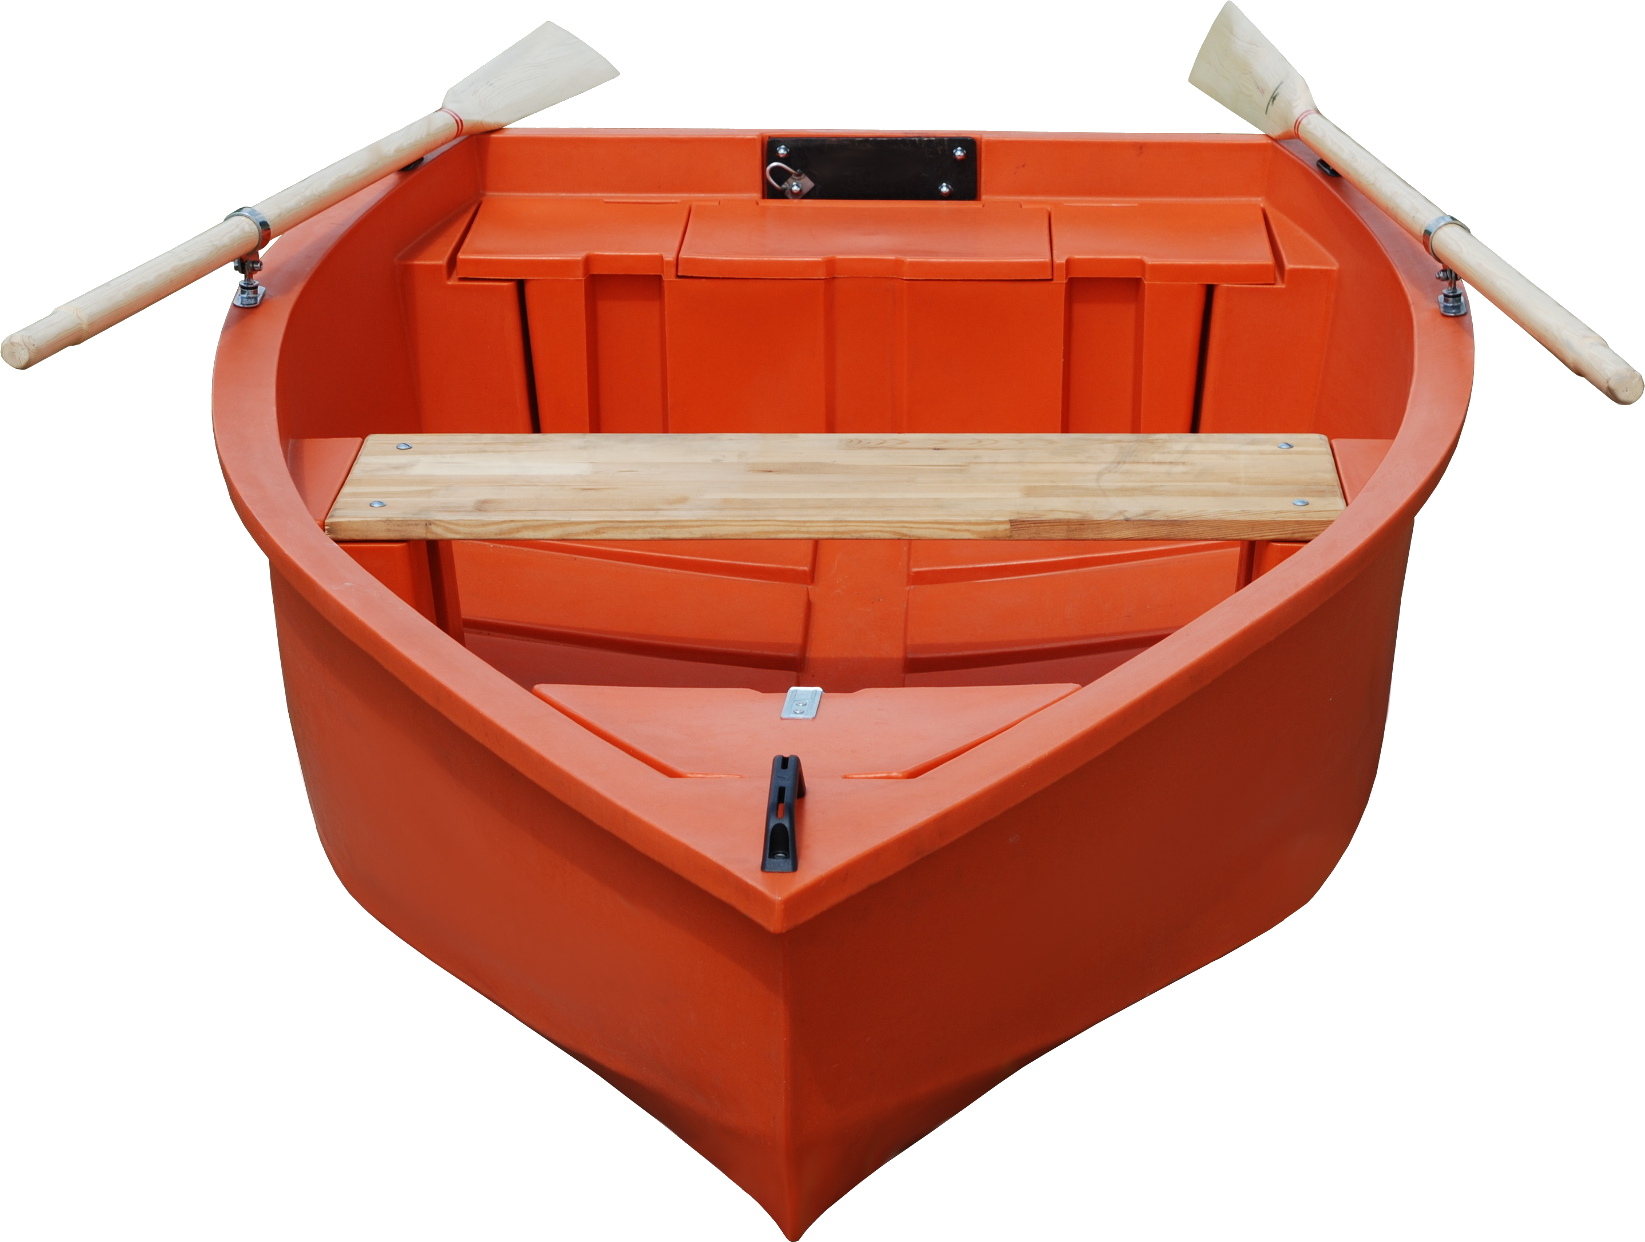 Wooden Boat PNG Image